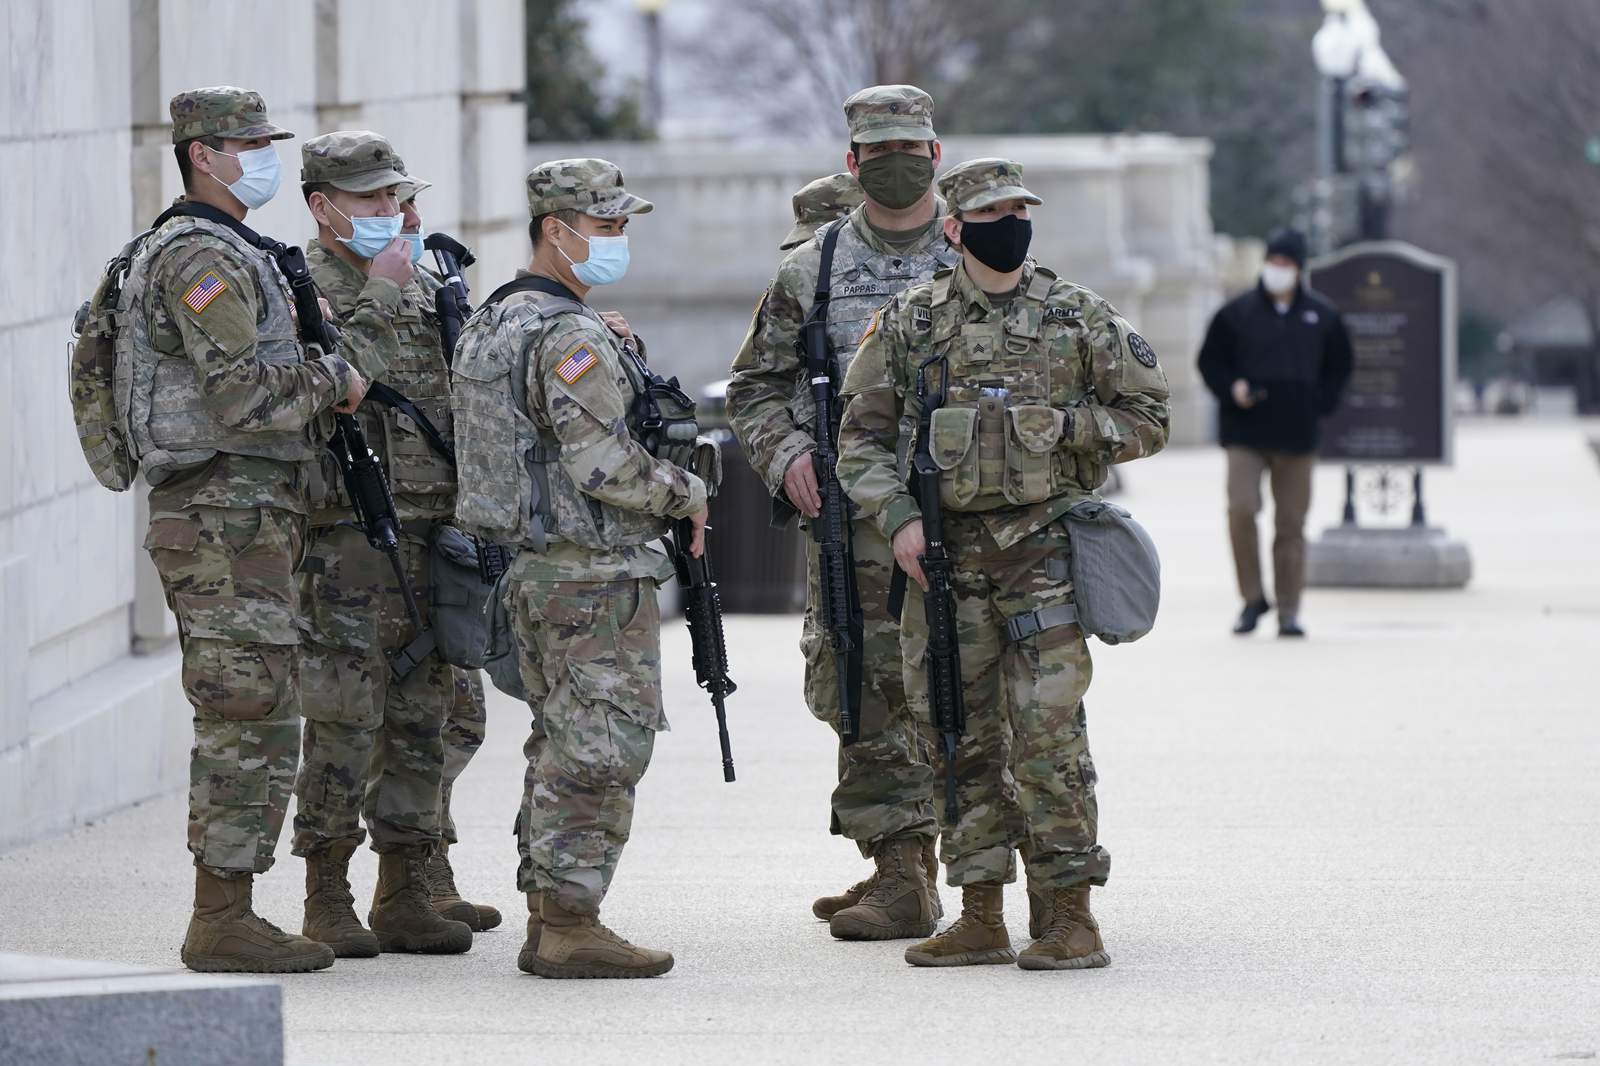 Police request 60-day extension of Guard at US Capitol